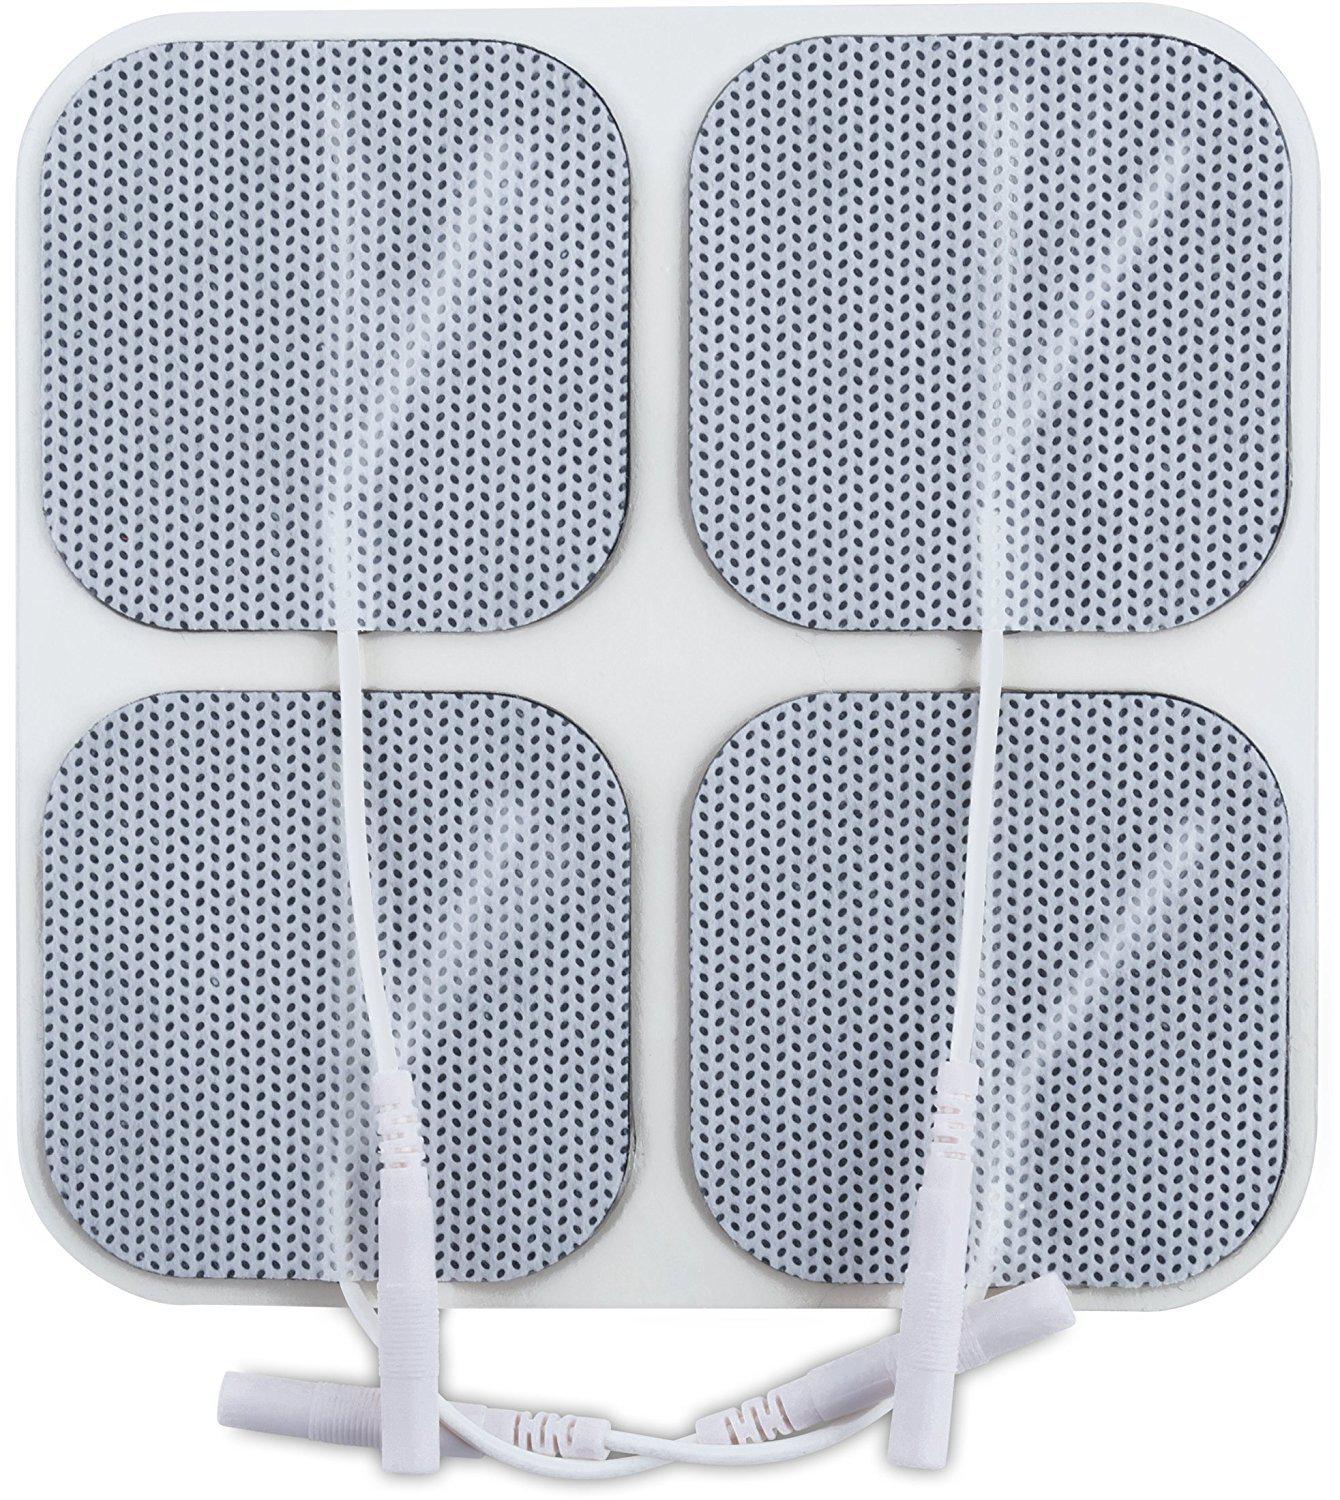 Tens Electrode Pads Tens Unit Accessories Self Adhesive